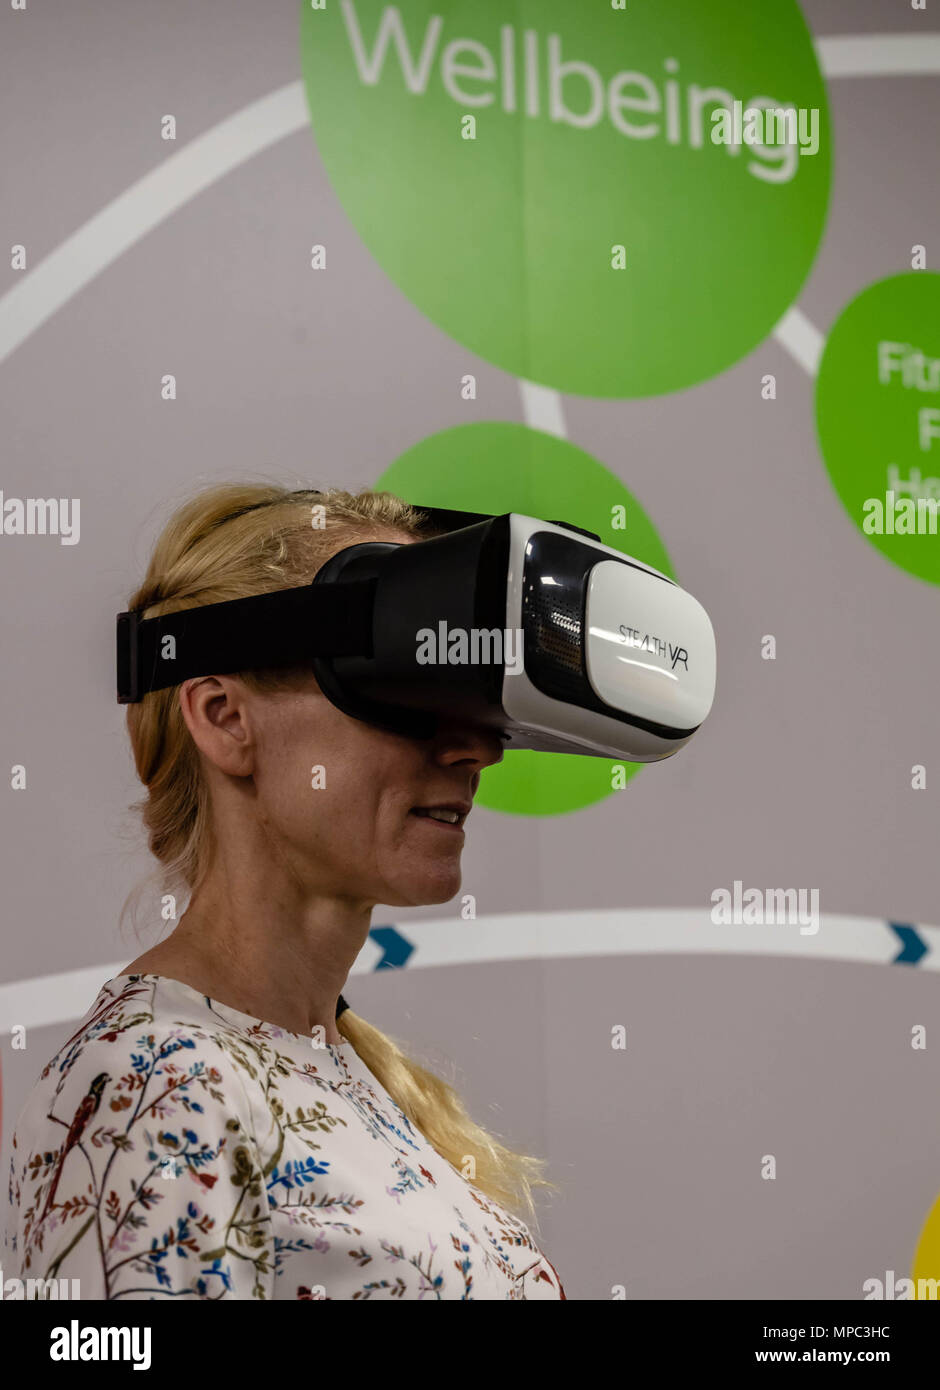 Brentwood 22nd May 2018  As part of Dementia Action Week!  Right At Home, a care organisation demonstrated the “Walk through Dementia” Virtual Reality headset to show what it is like living with dementia presented by Alzheimer’s research UK Credit Ian Davidson/Alamy Live News Stock Photo